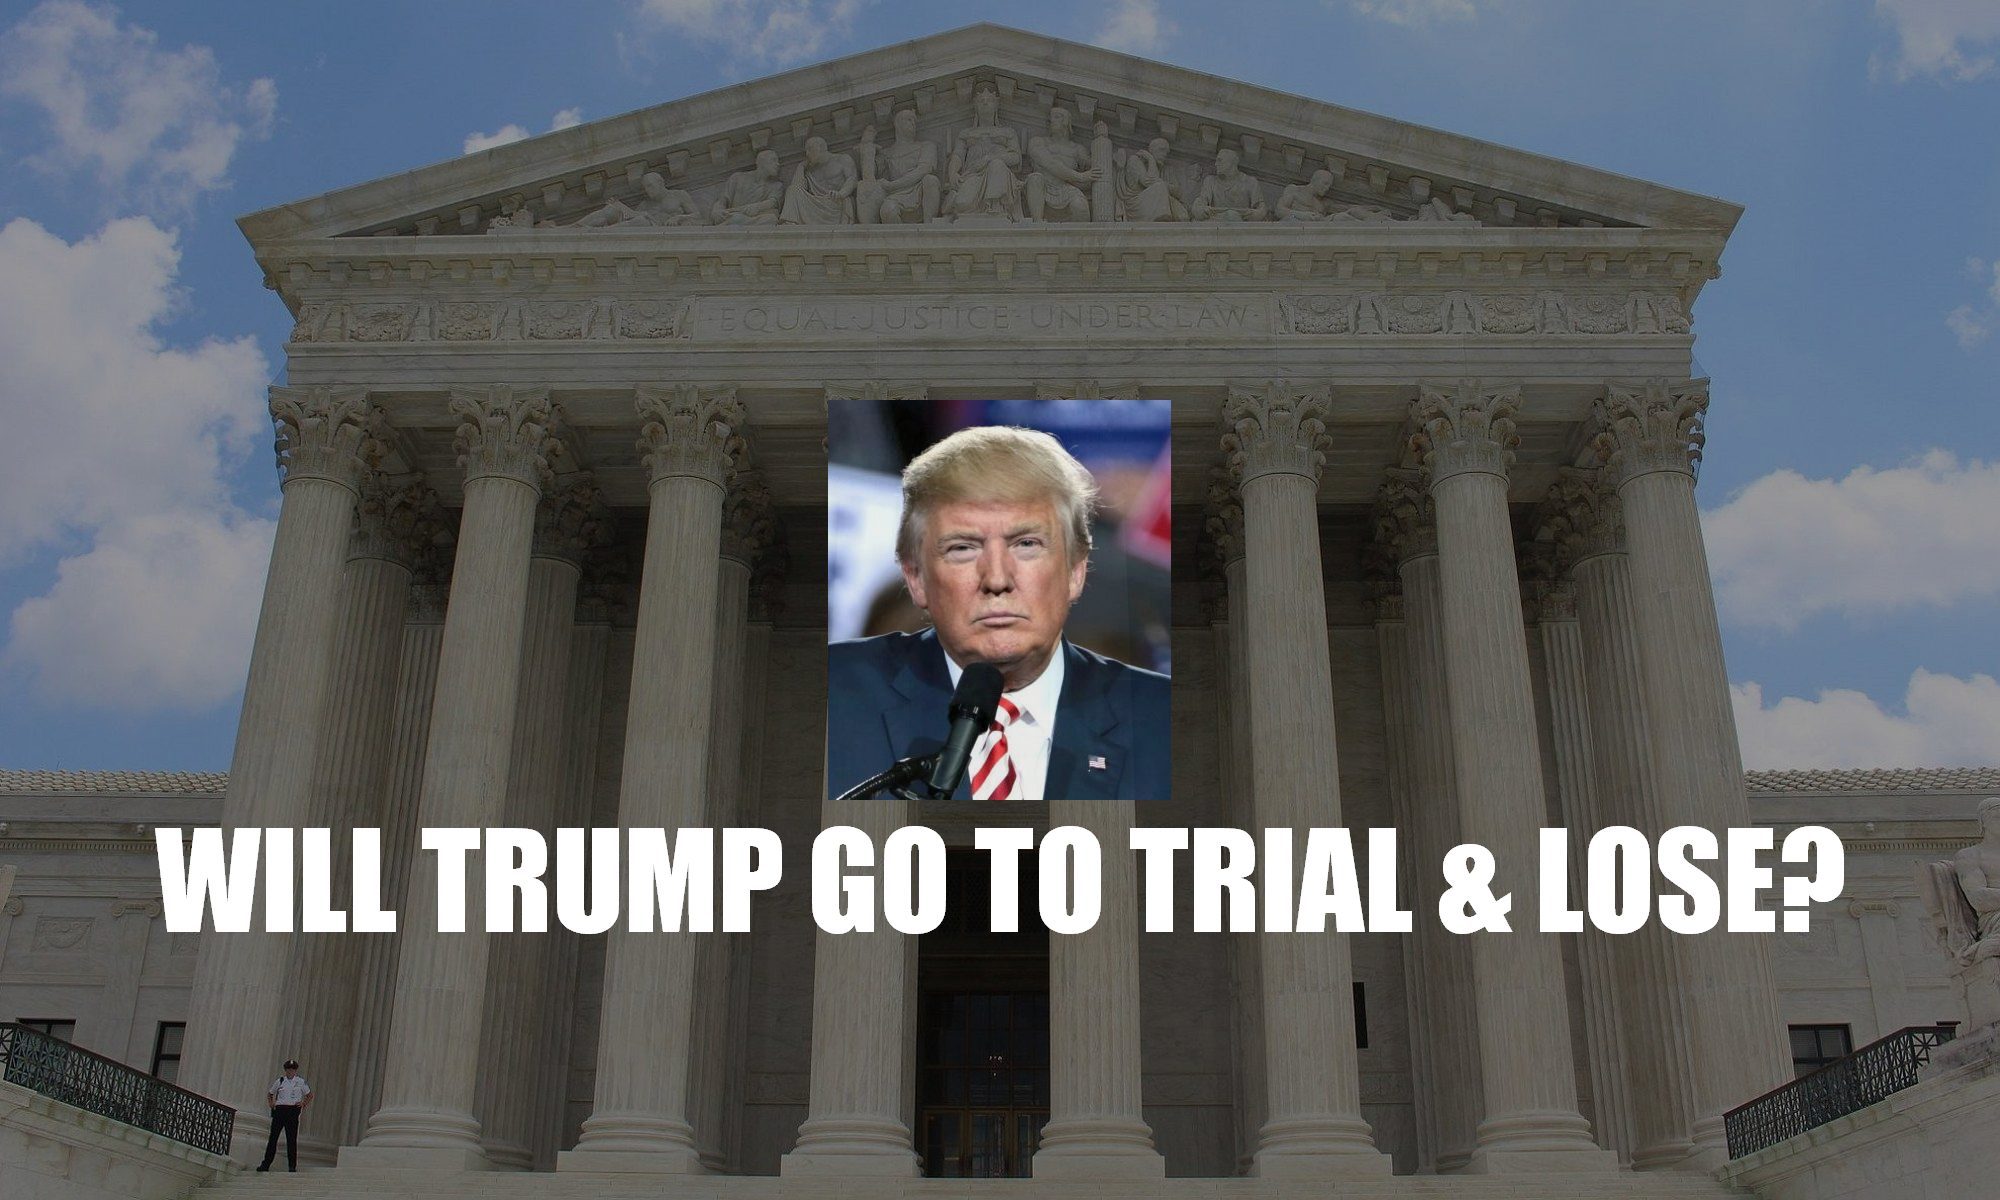 Will the Department of Justice Merrick Garland charge Trump with a crime convict in a trial? Will Trump go to trial and lose?